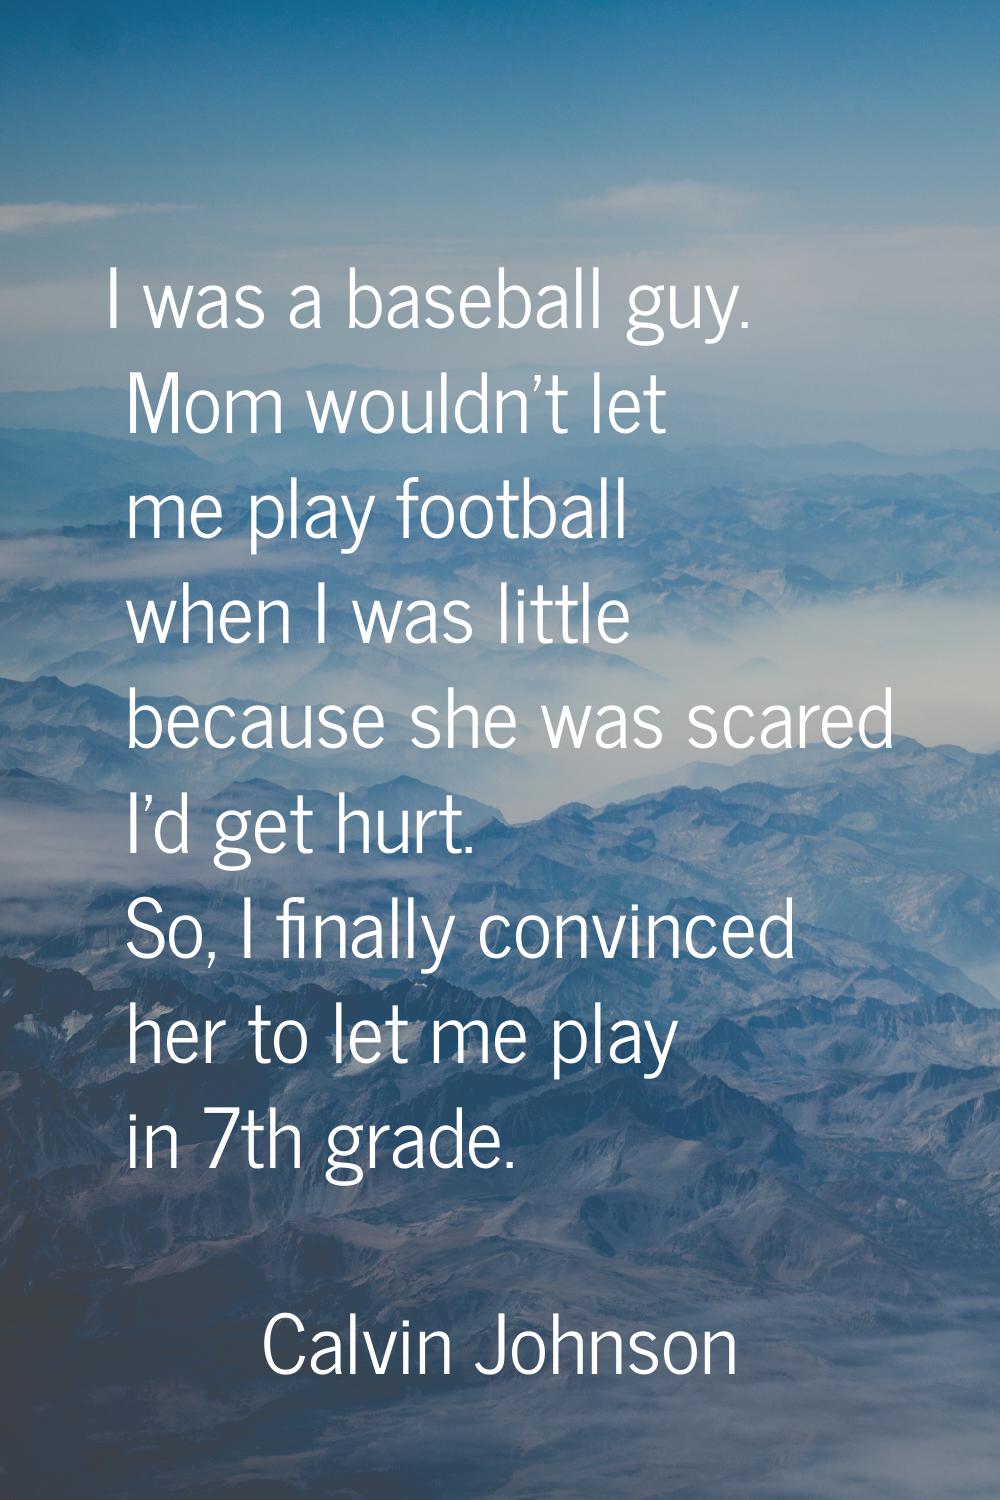 I was a baseball guy. Mom wouldn't let me play football when I was little because she was scared I'